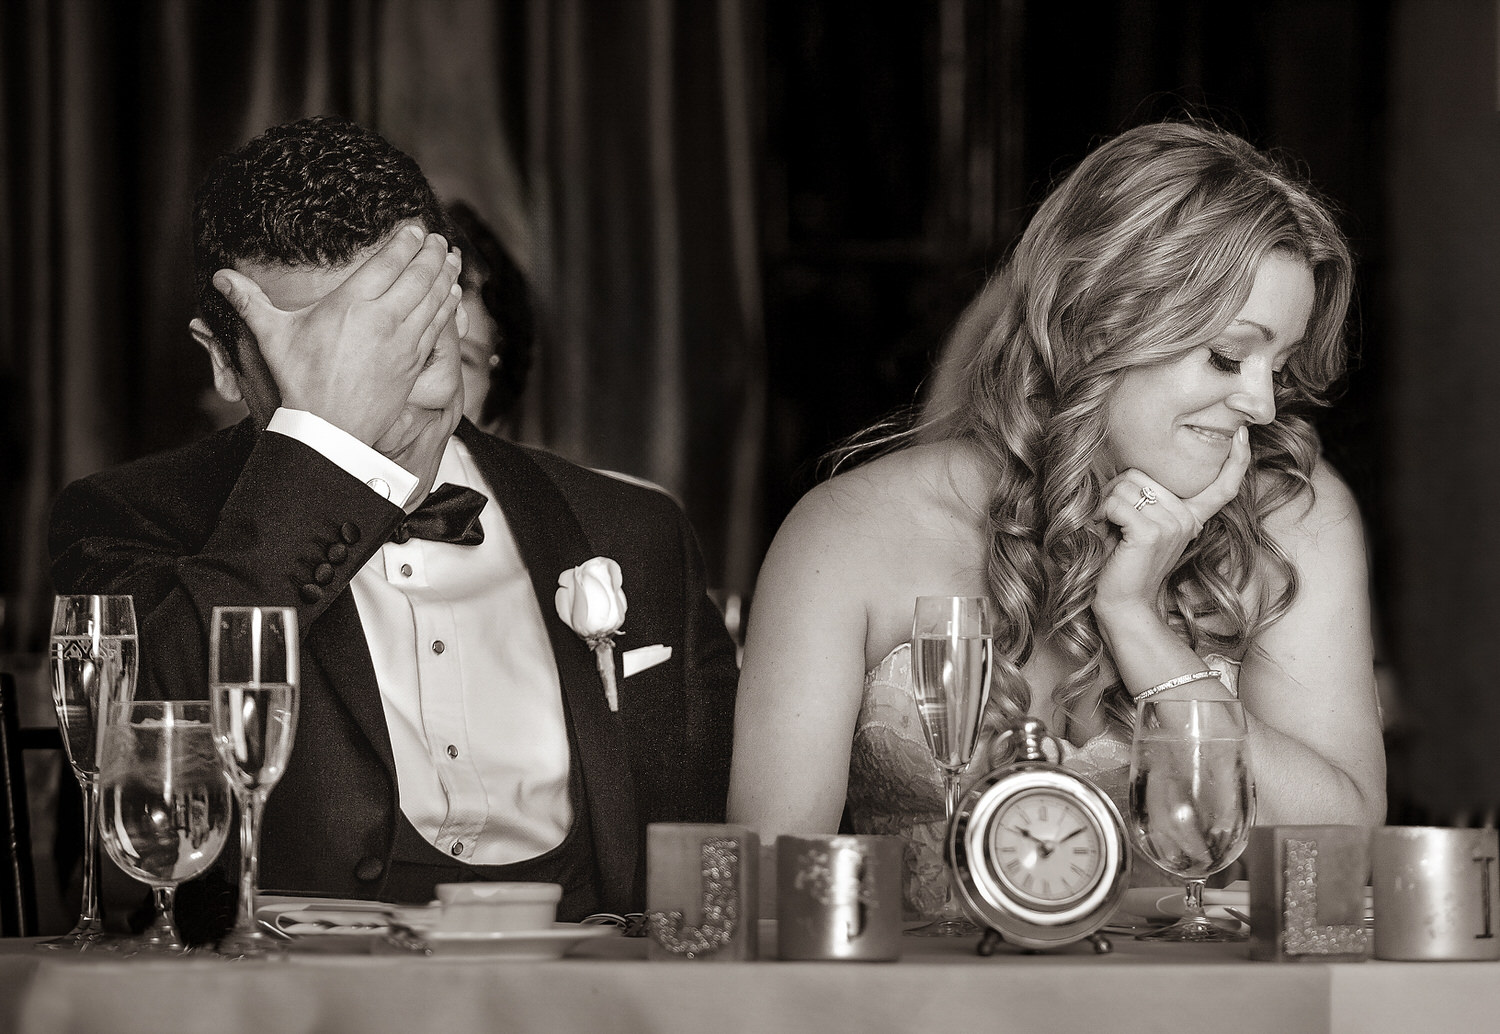 A groom facepalming and a bride smiling thoughtfully, both elegantly dressed, seated at a wedding table with a romantic setting in sepia tones in documentary style wedding photography